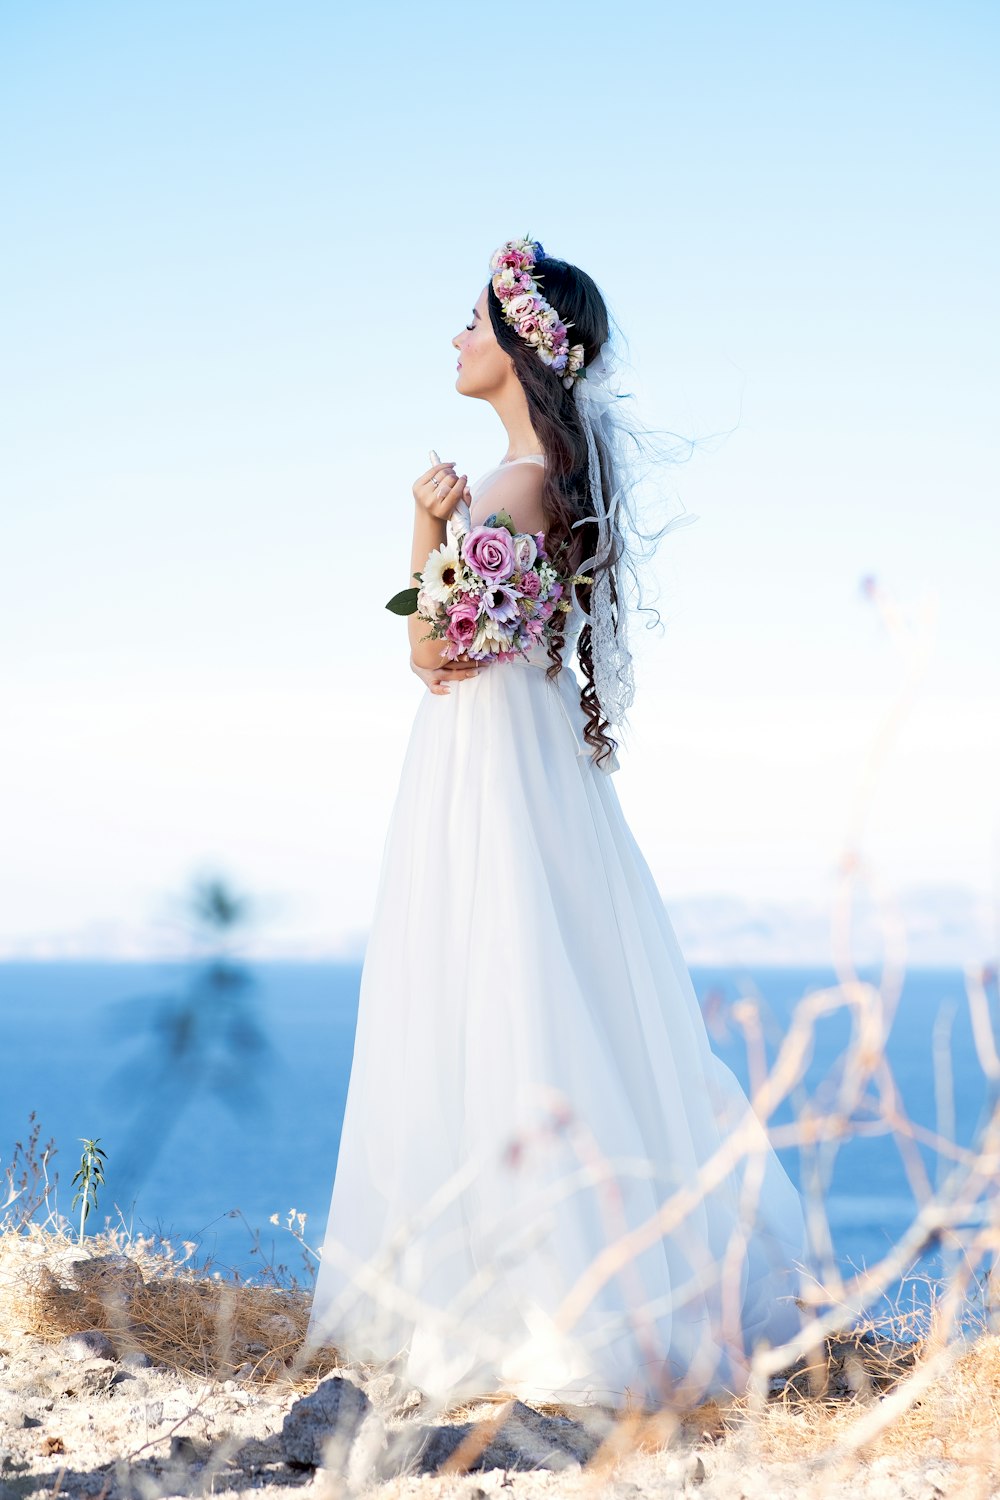 woman in white wedding dress standing on brown grass field during daytime